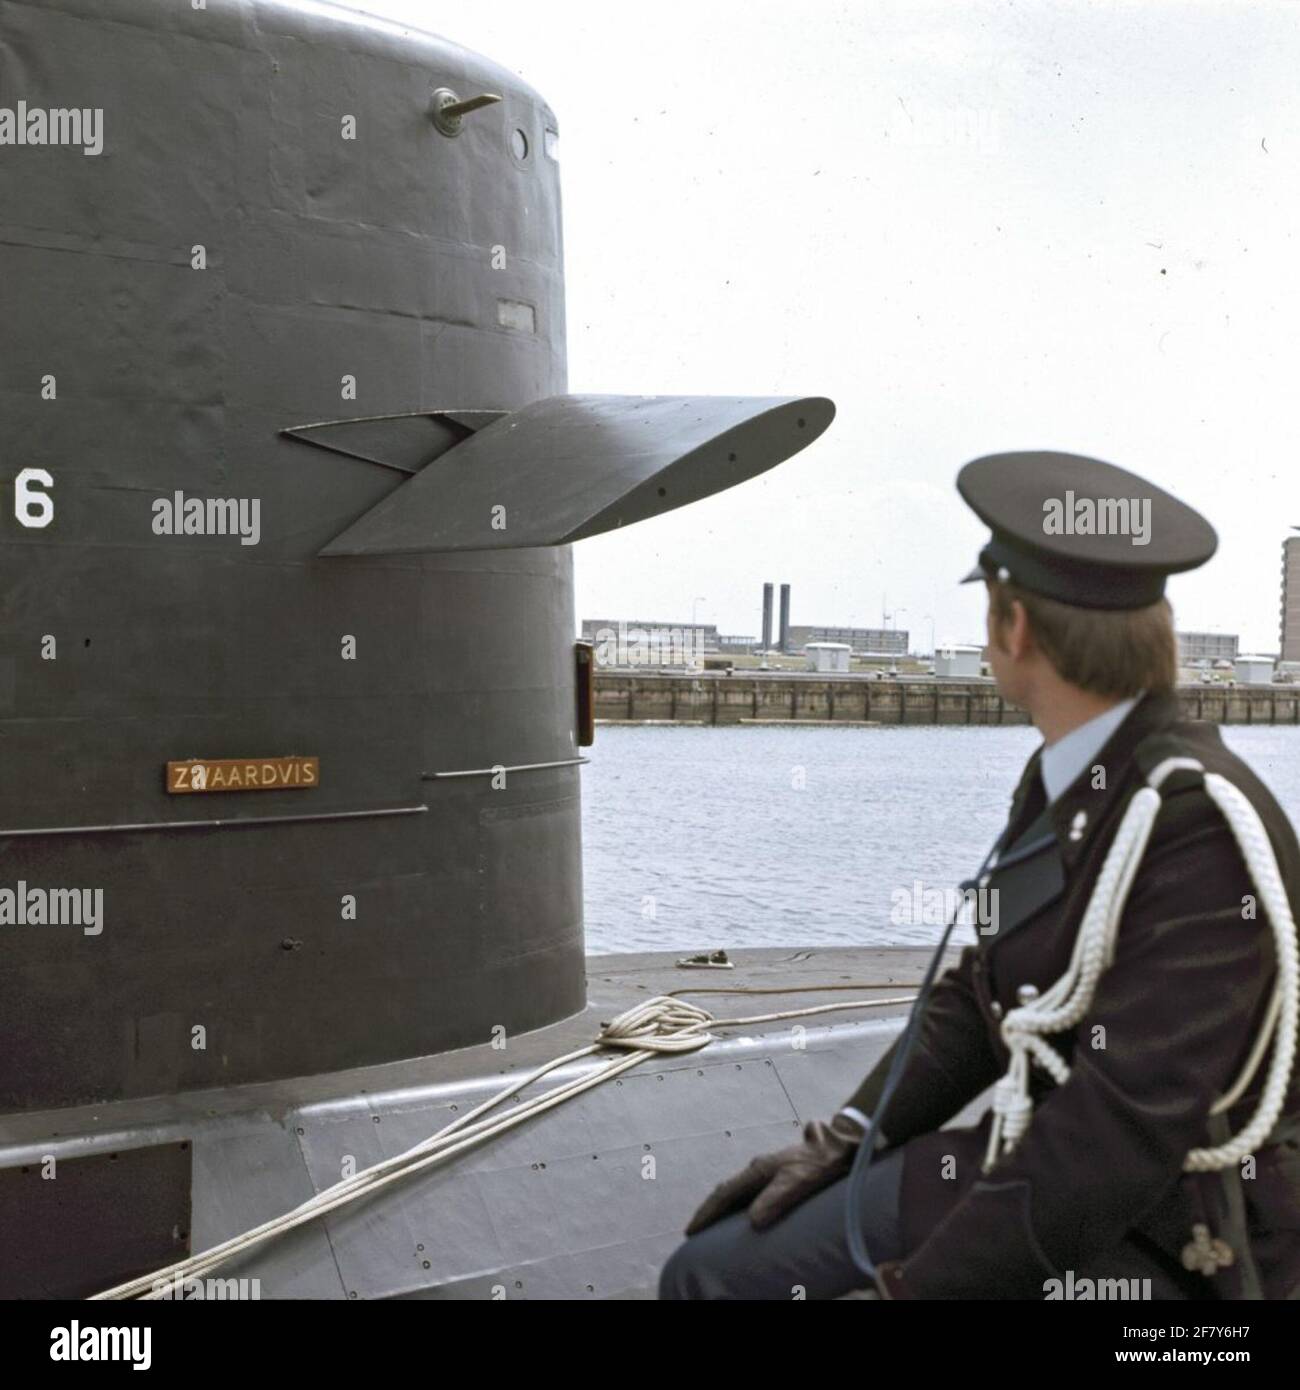 The Could. Marechaussee during inspection on the scaffolding of the submarine service in the port of Den Helder with in the background the submarine Hr.Ms. Swordfish (1972-1994). Stock Photo